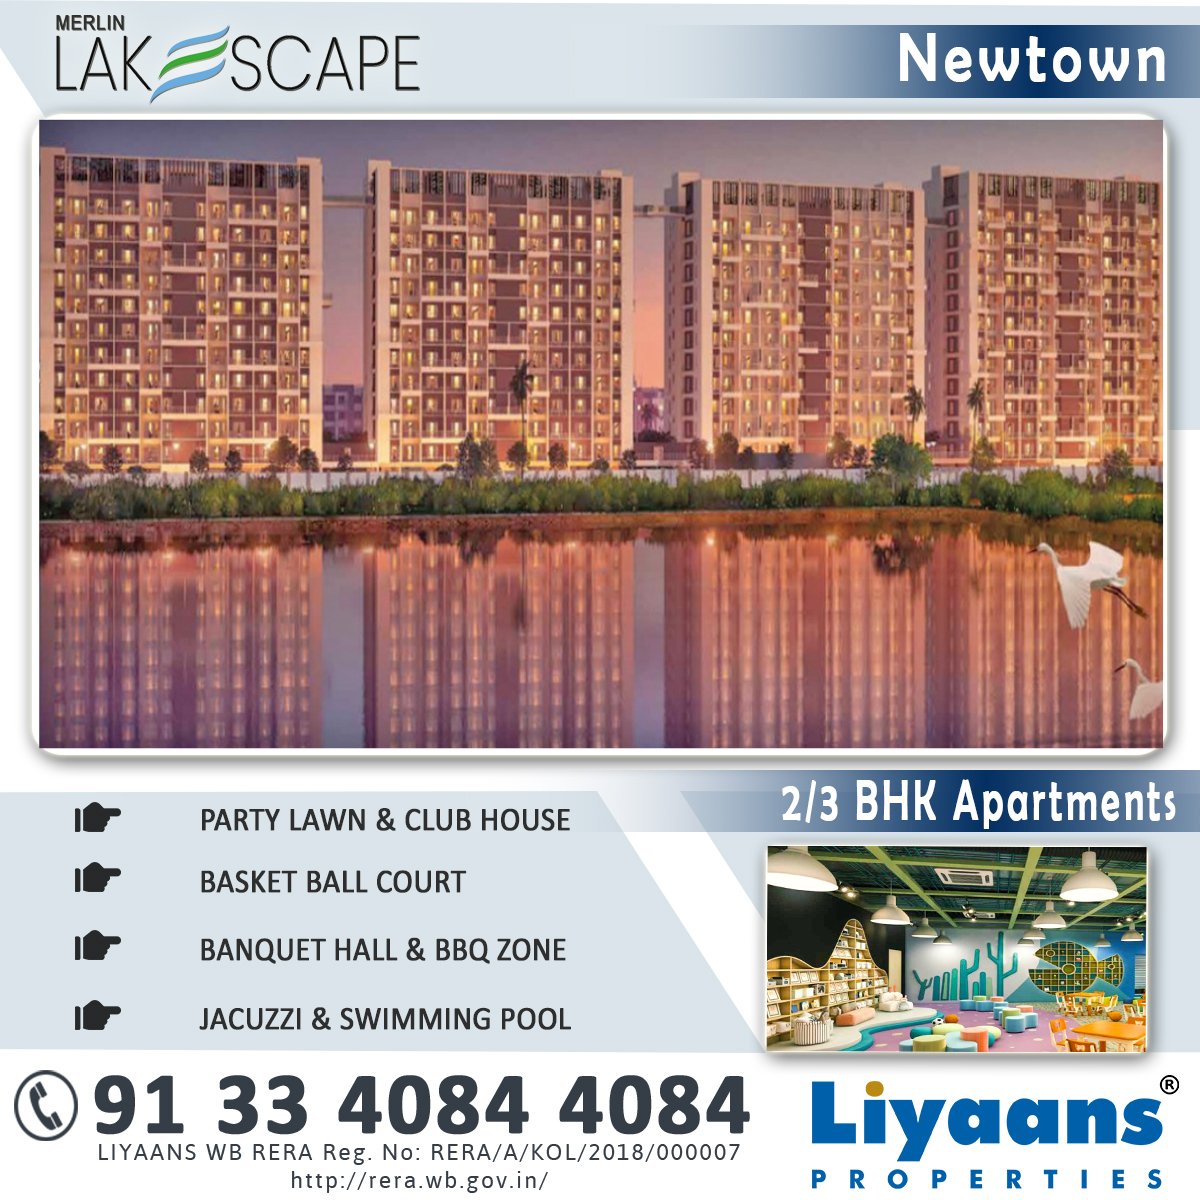 #Apartments provides #varieties of #features and #amenities which makes your #living #lifestyle more #unique in #Newtown. Hurry Up!  Call us for more details 03340844084

#MerlinLakescape #Flatsinkolkata #PropertyinNewtown #LiyaansProperties #MaheshSomani